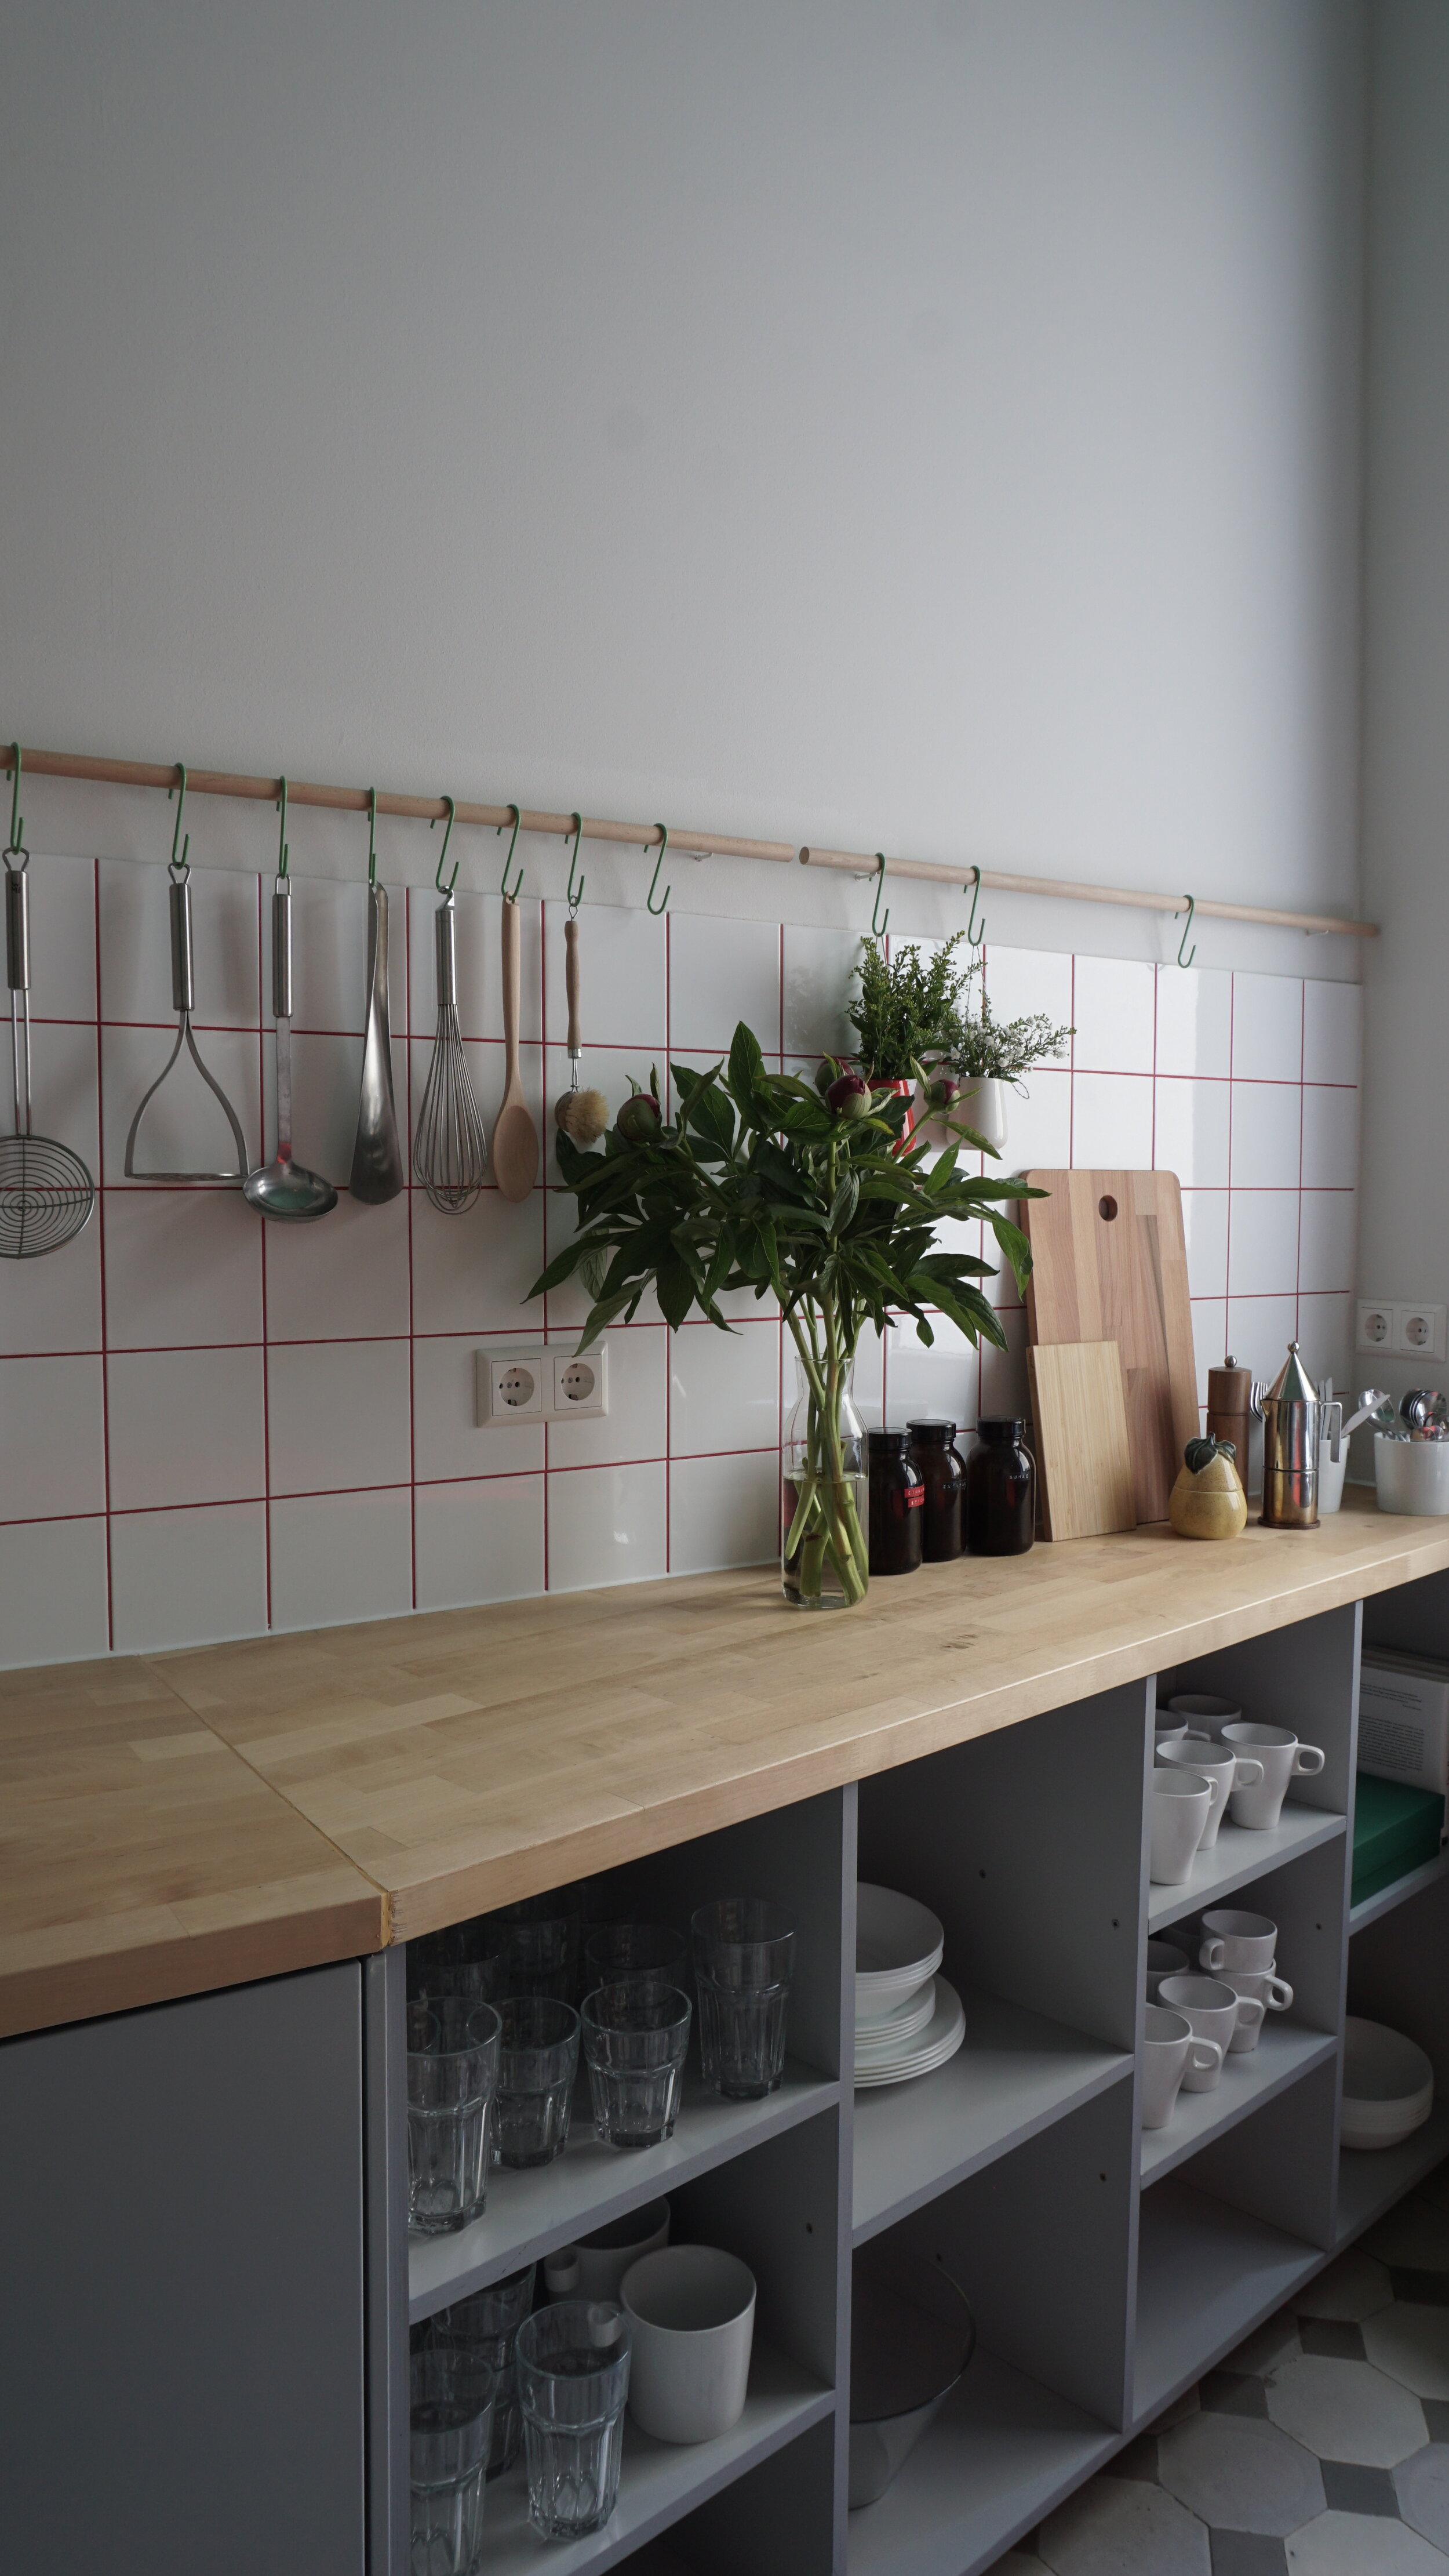 Kitchen in Coliving Flat Berlin